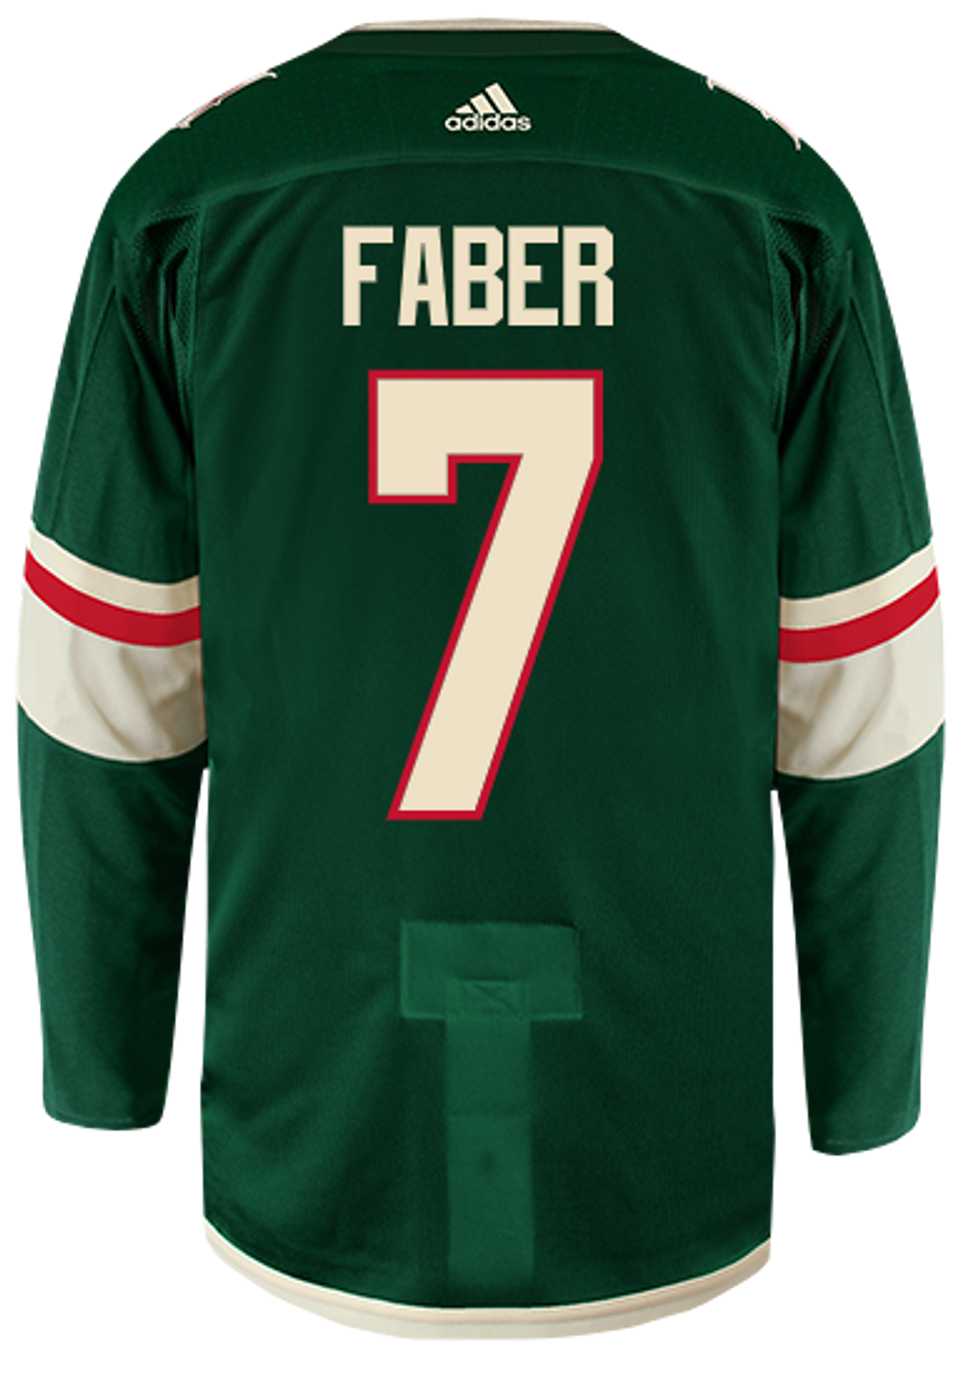 The Hockey Lodge - The Minnesota Wild 2022 NHL Winter Classic jersey  available at  or the Xcel Energy Center Hockey Lodge.  These jerseys are a limited edition, we will sell out!